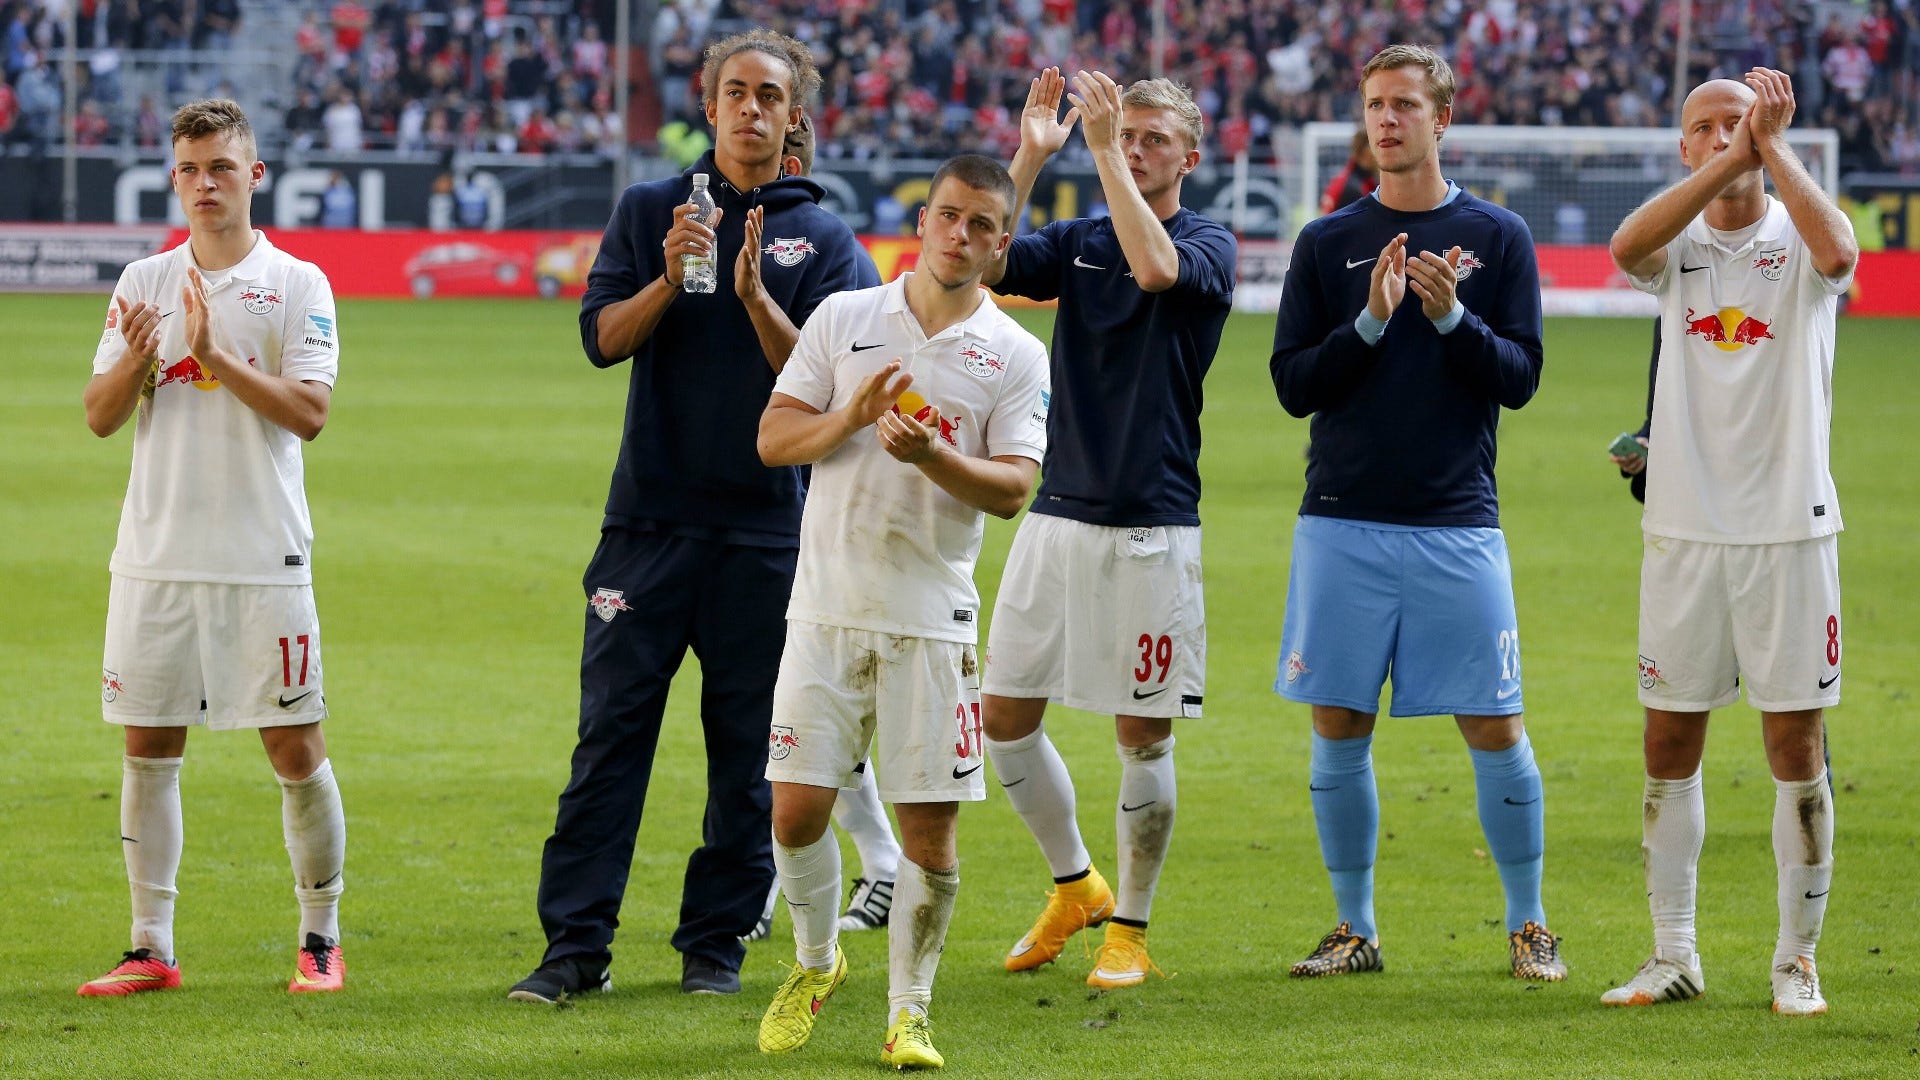 GER ONLY Thomas Dähne Kimmich Demme RB Leipzig 2014